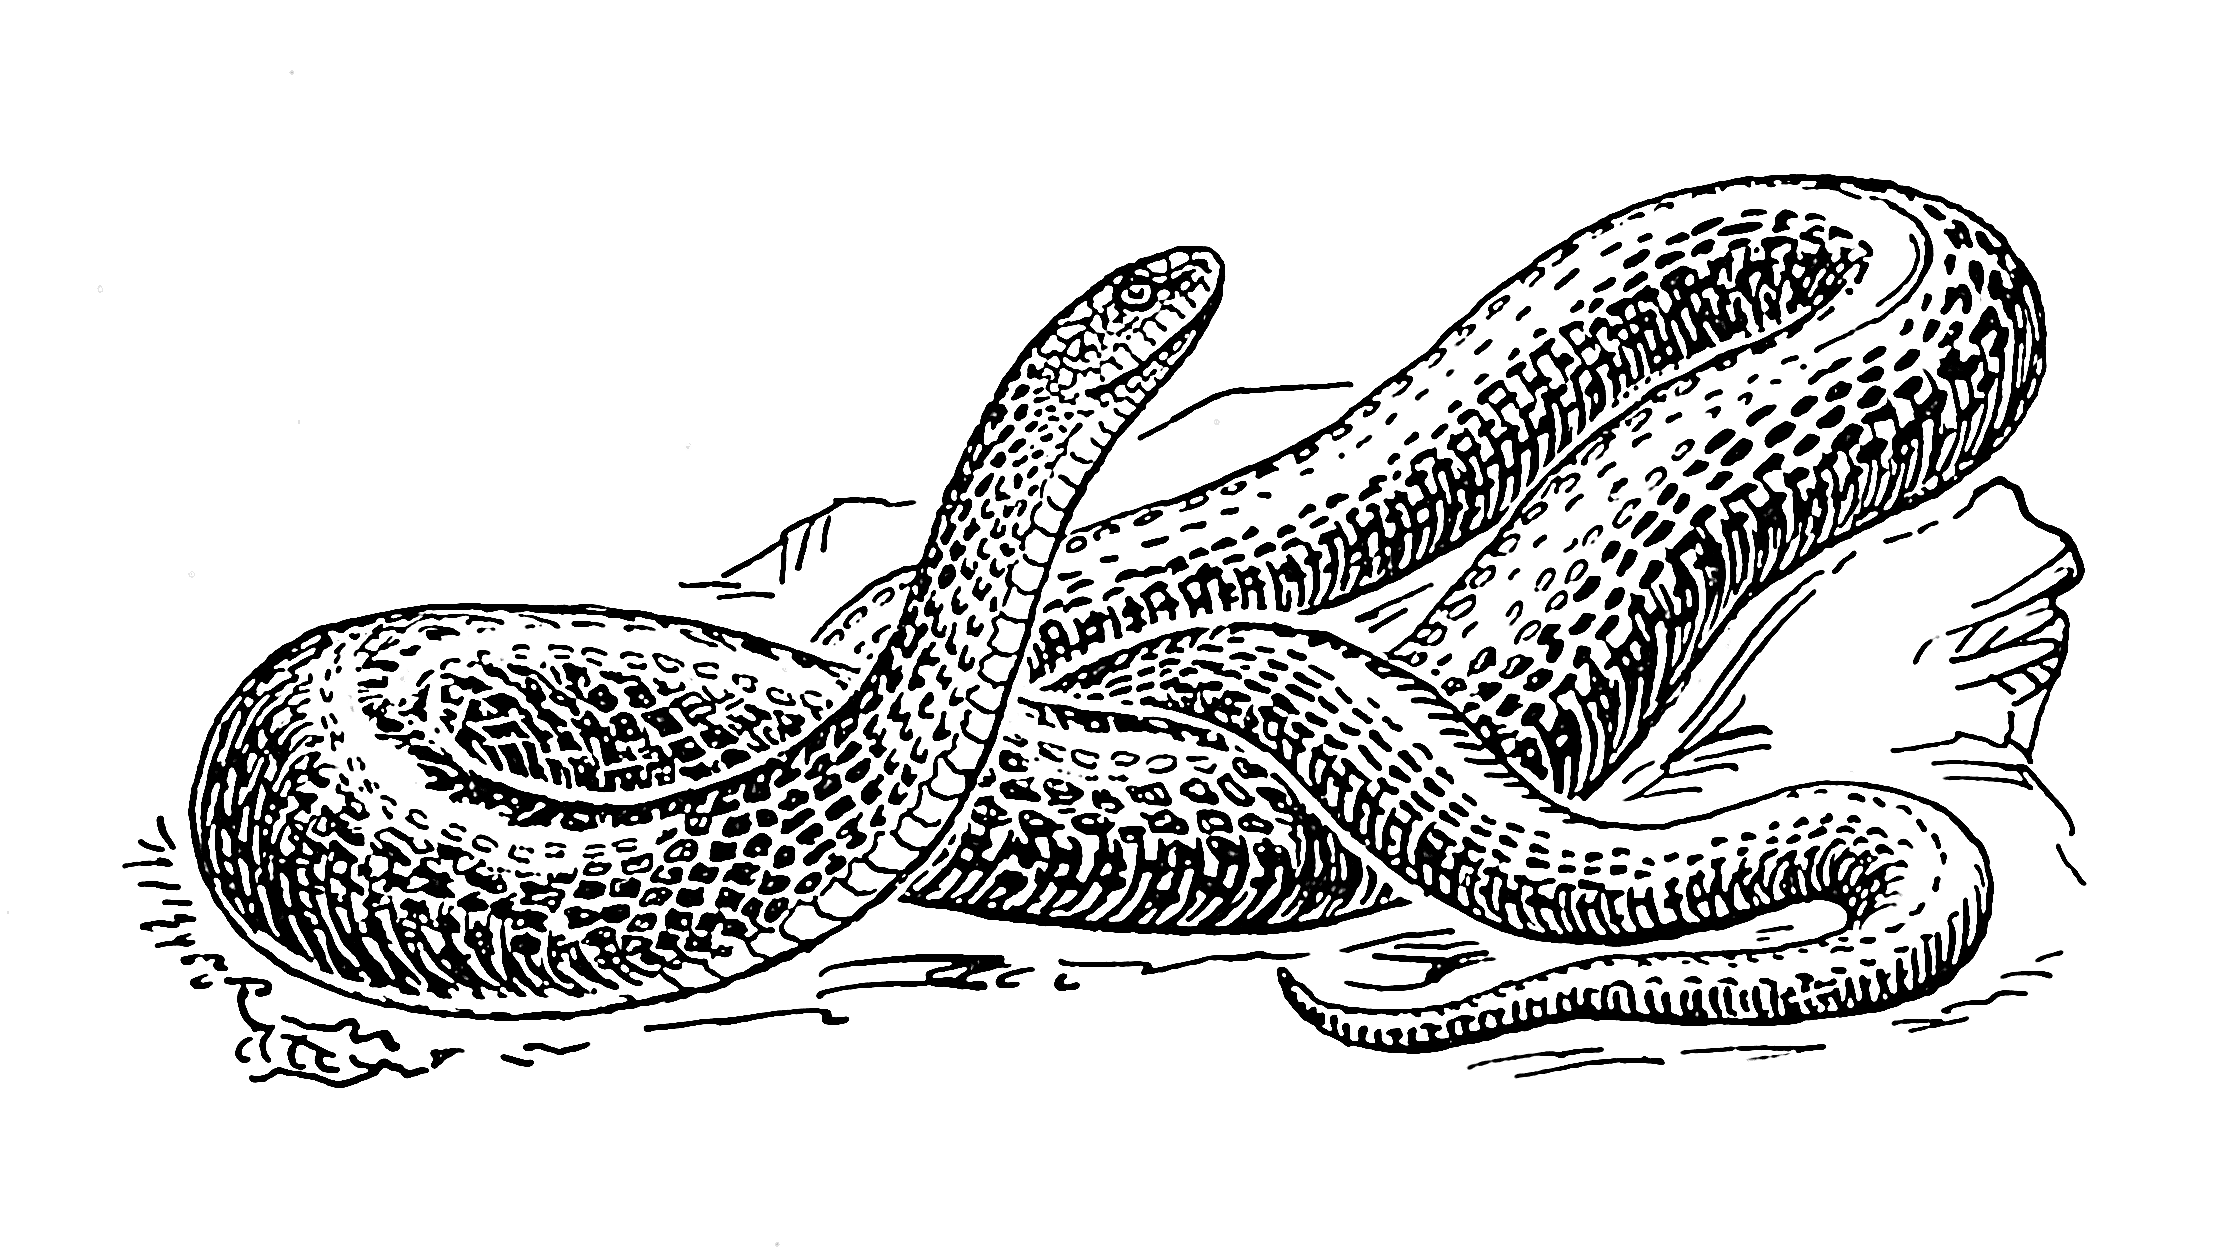 File:Black snake 2 (PSF).png - Wikimedia Commons